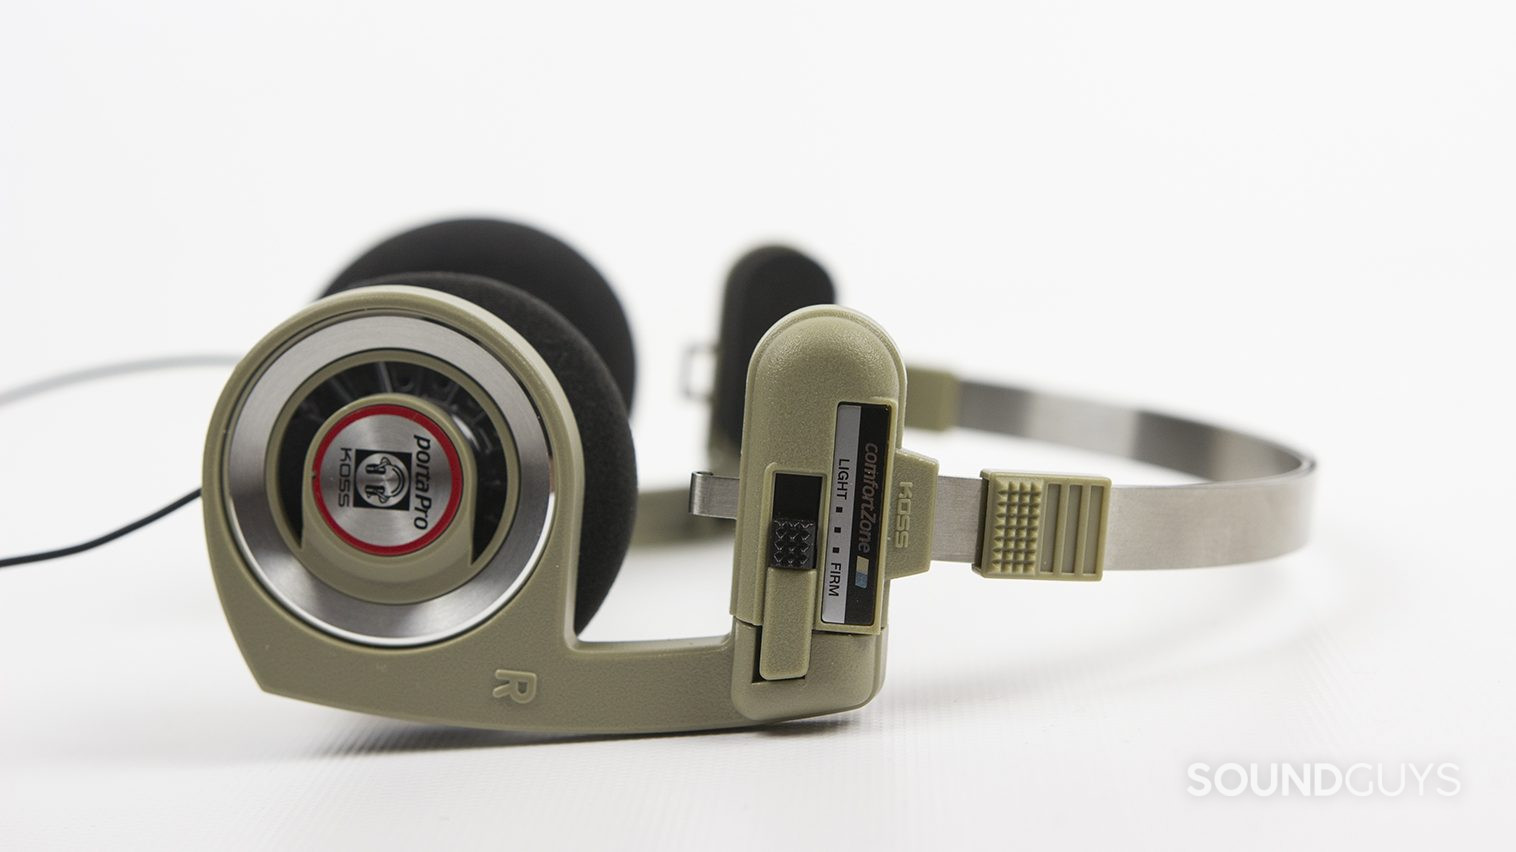 Koss Porta Pro headphone refresh is better than ever for just $60